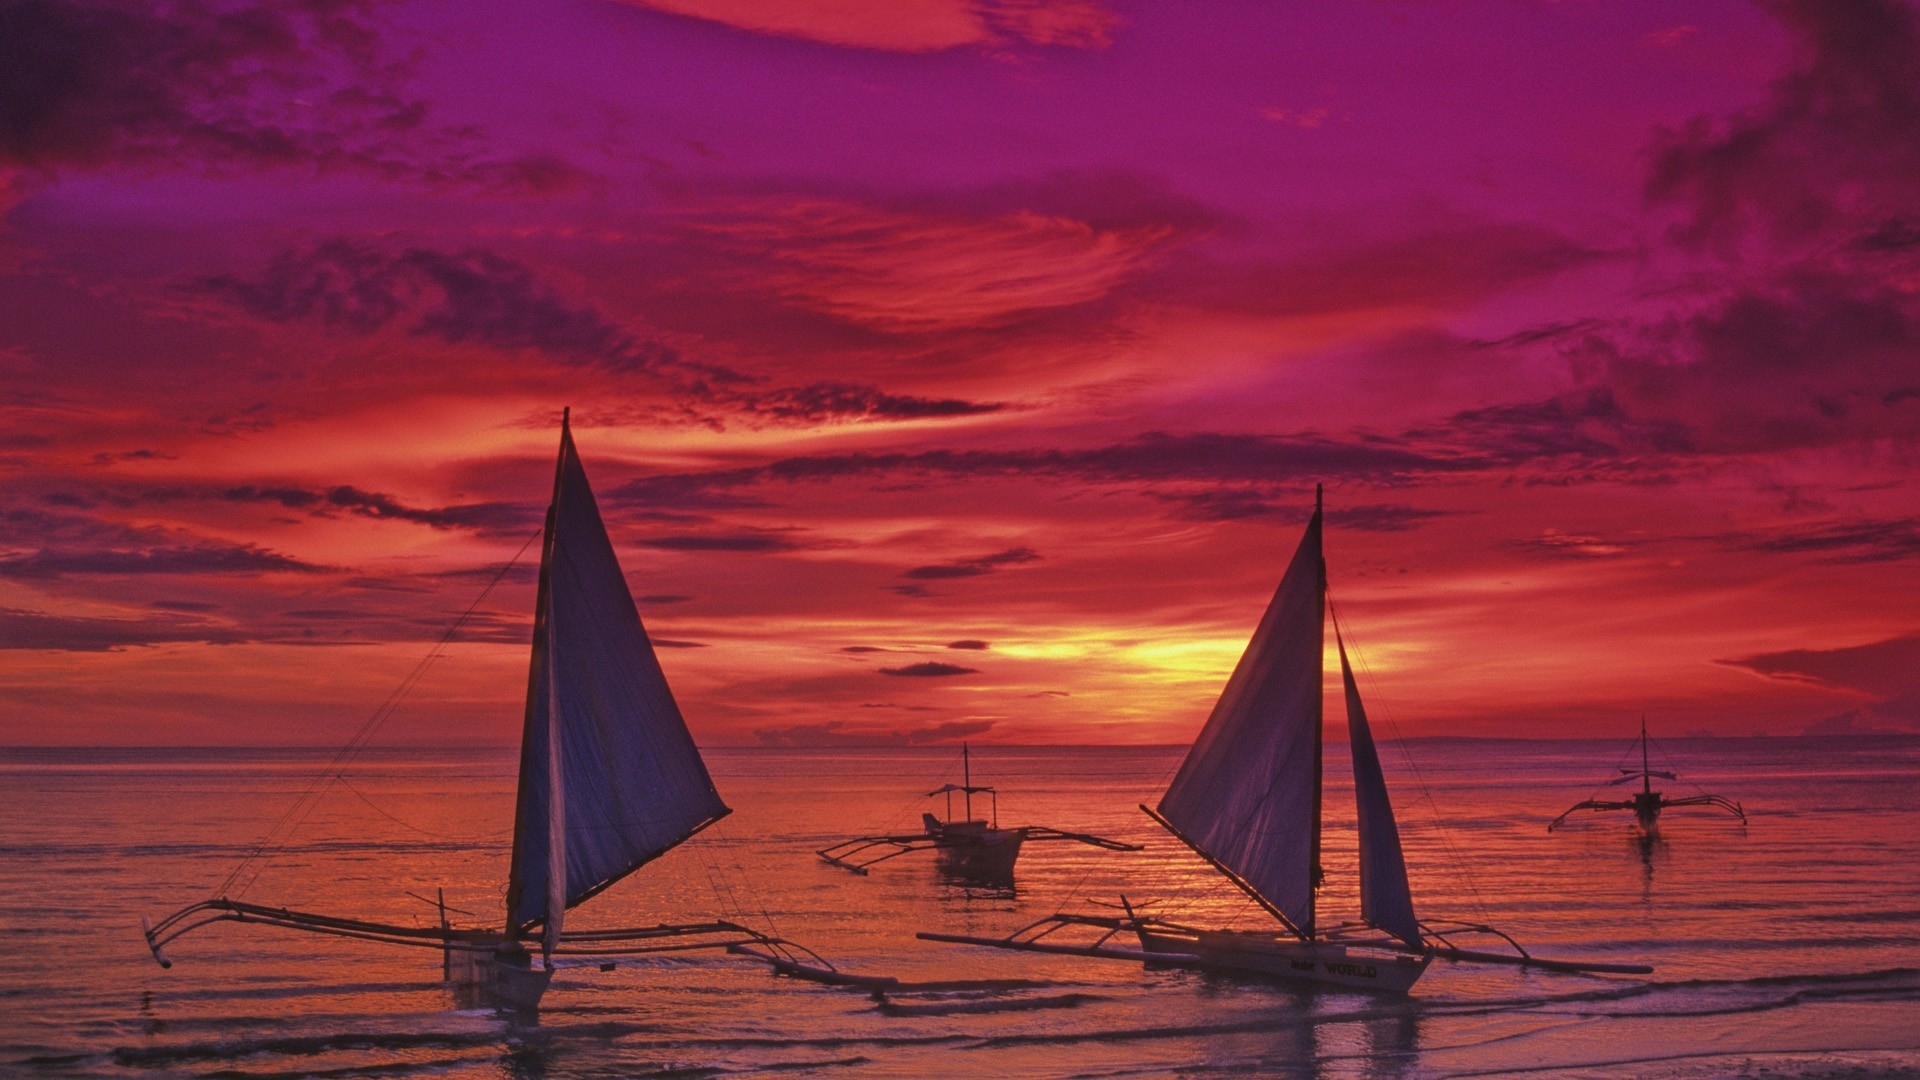 philippines, Vehicles, Watercrafts, Boats, Ships, Sailboat, Sail, Nature, Beaches, Ocean, Sea, Sky, Clouds, Sunrise, Sunset, Color Wallpaper